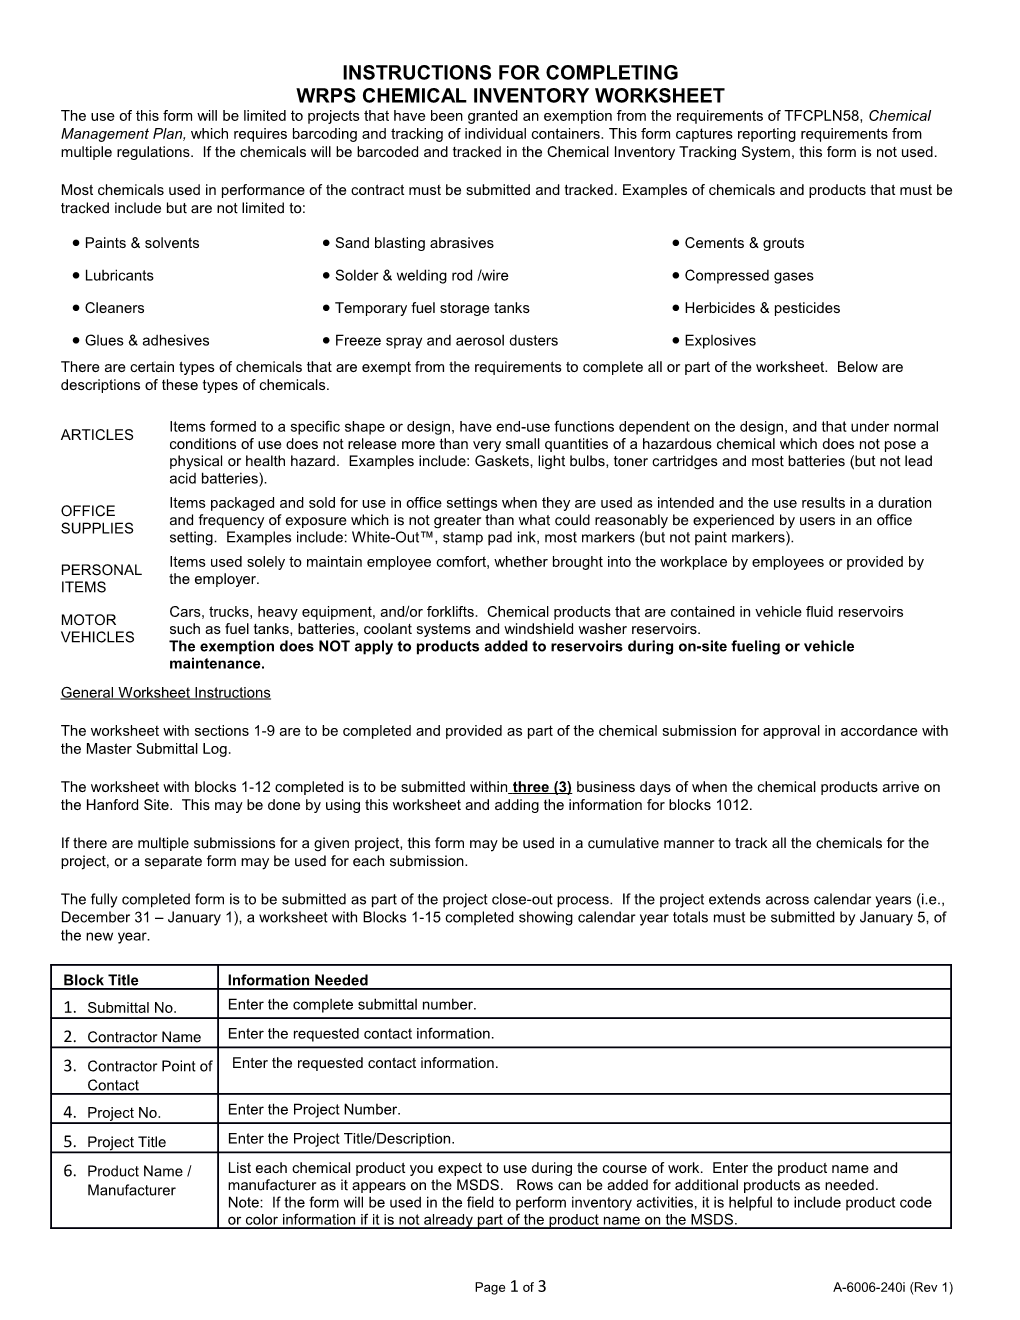 Wrps Chemical Inventory Worksheet